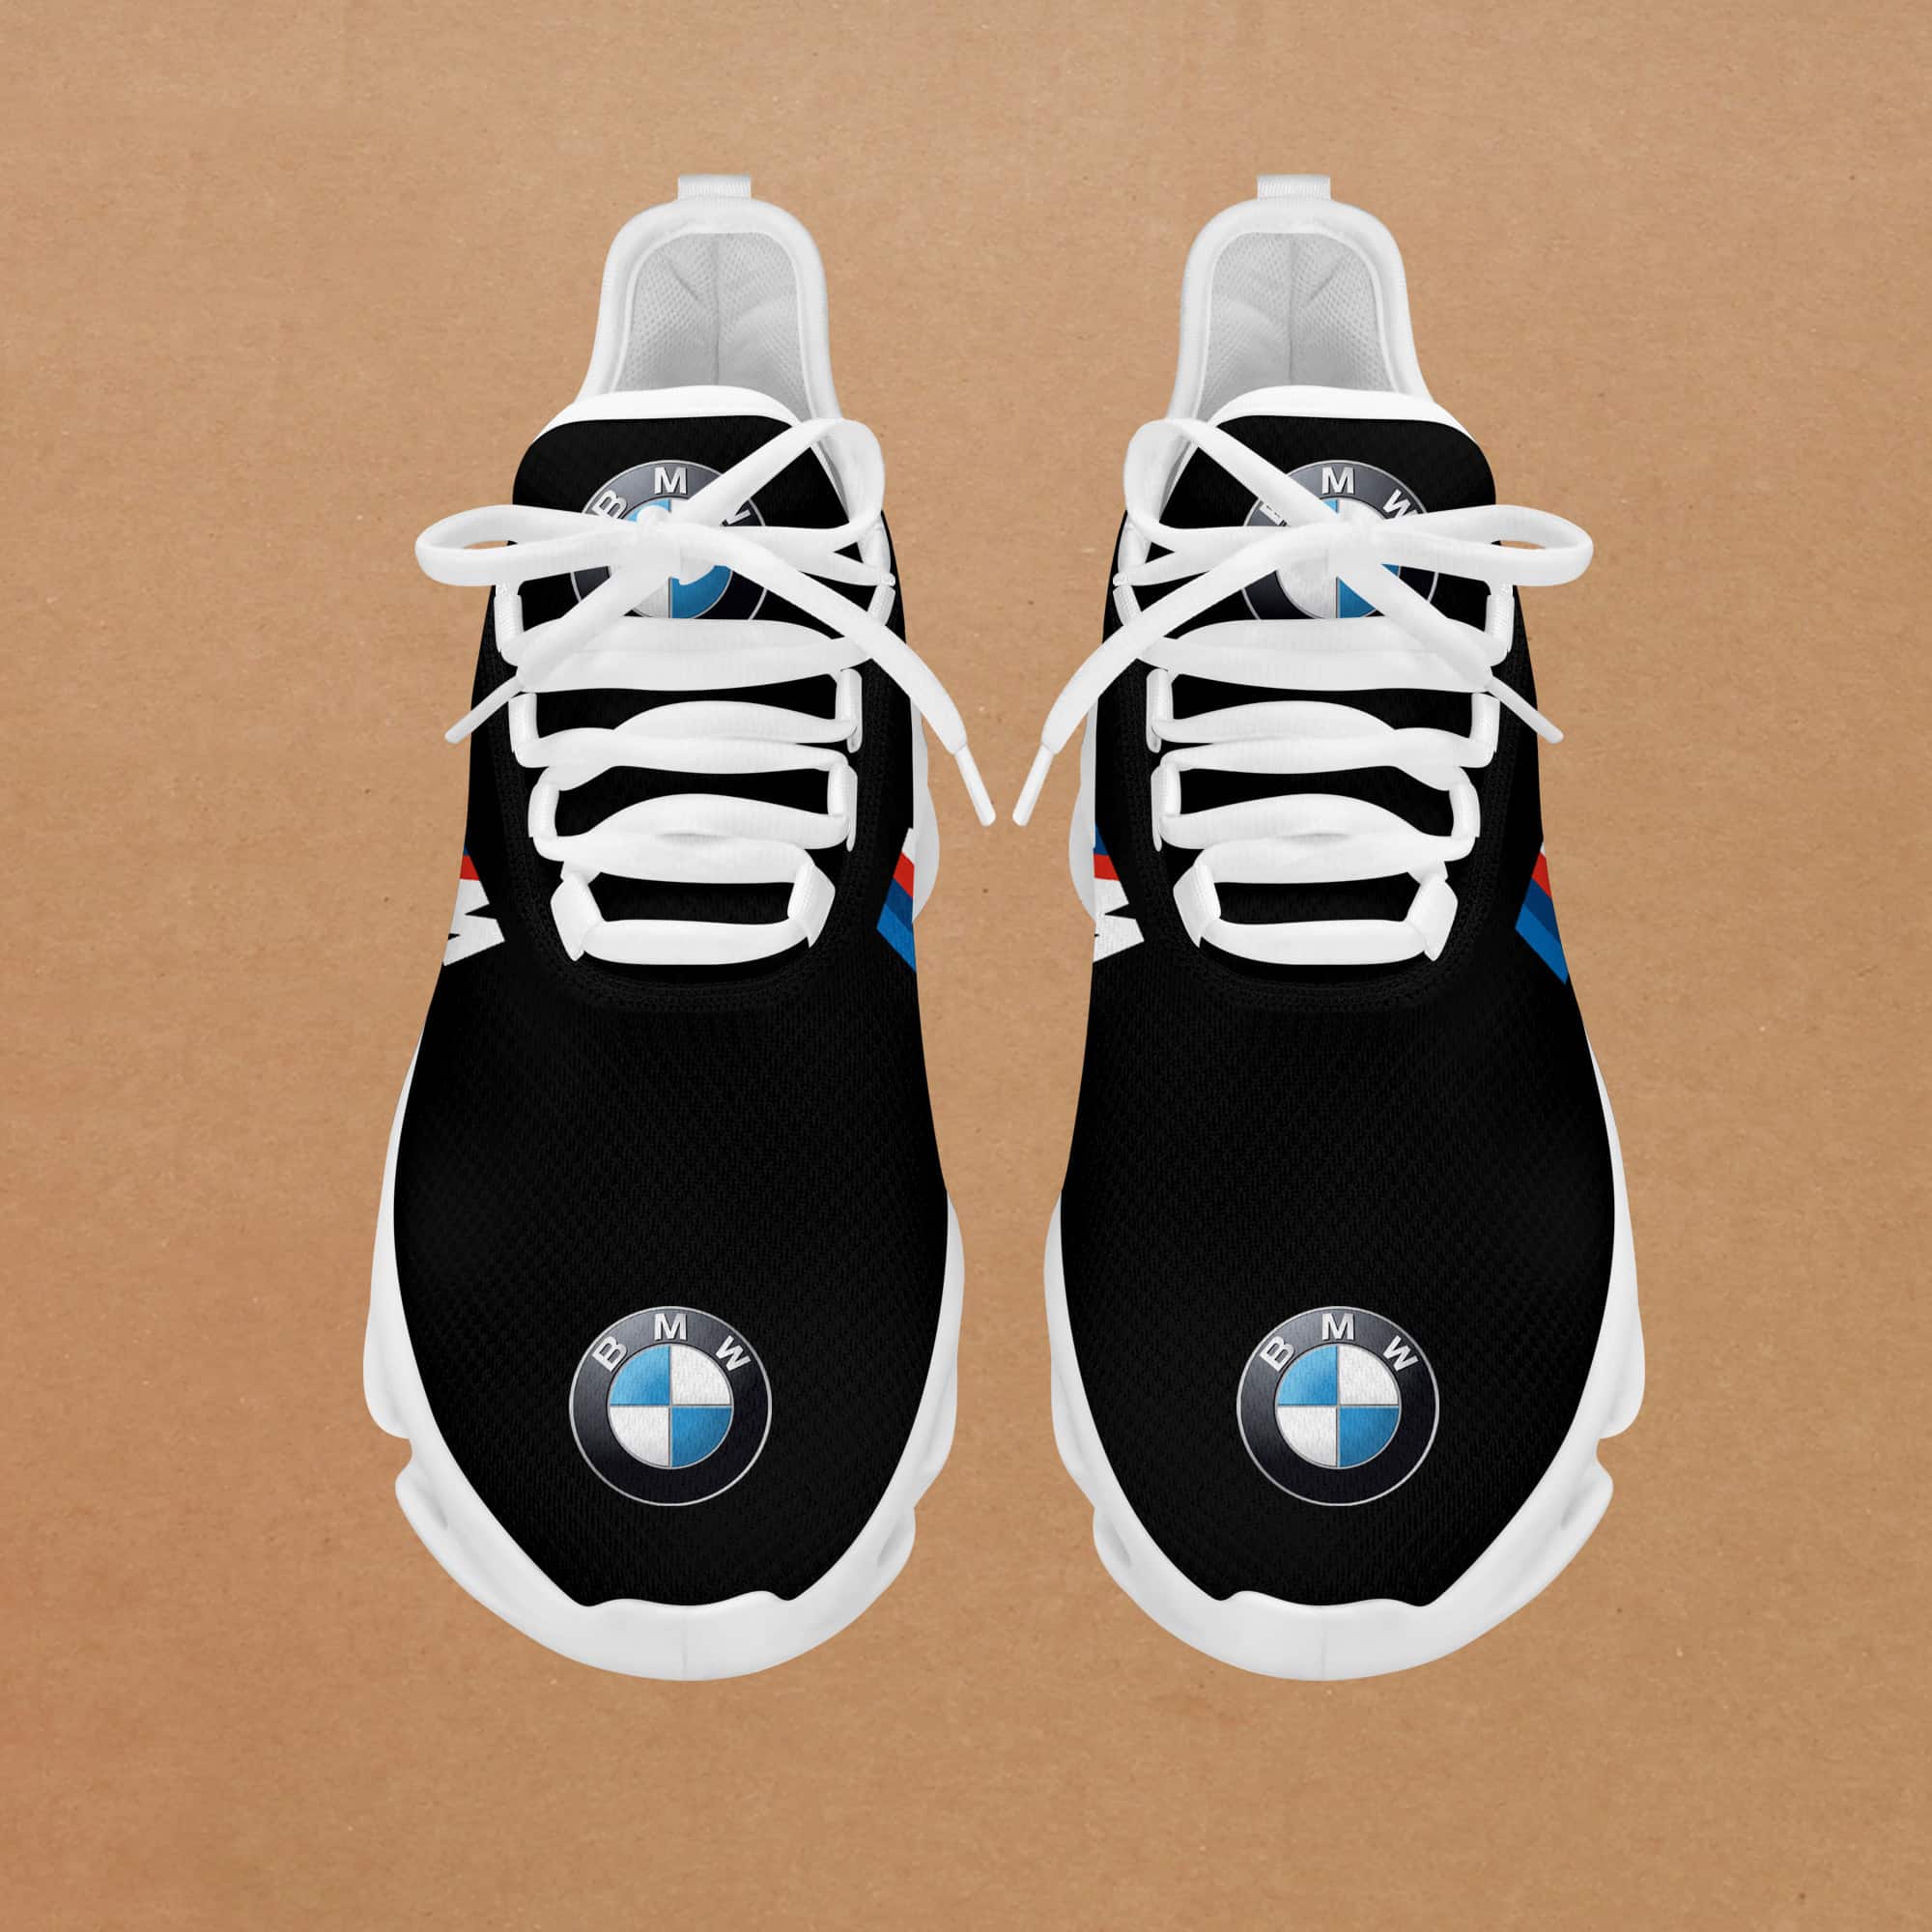 Bmw M Running Shoes Max Soul Shoes Sneakers Ver 6 3